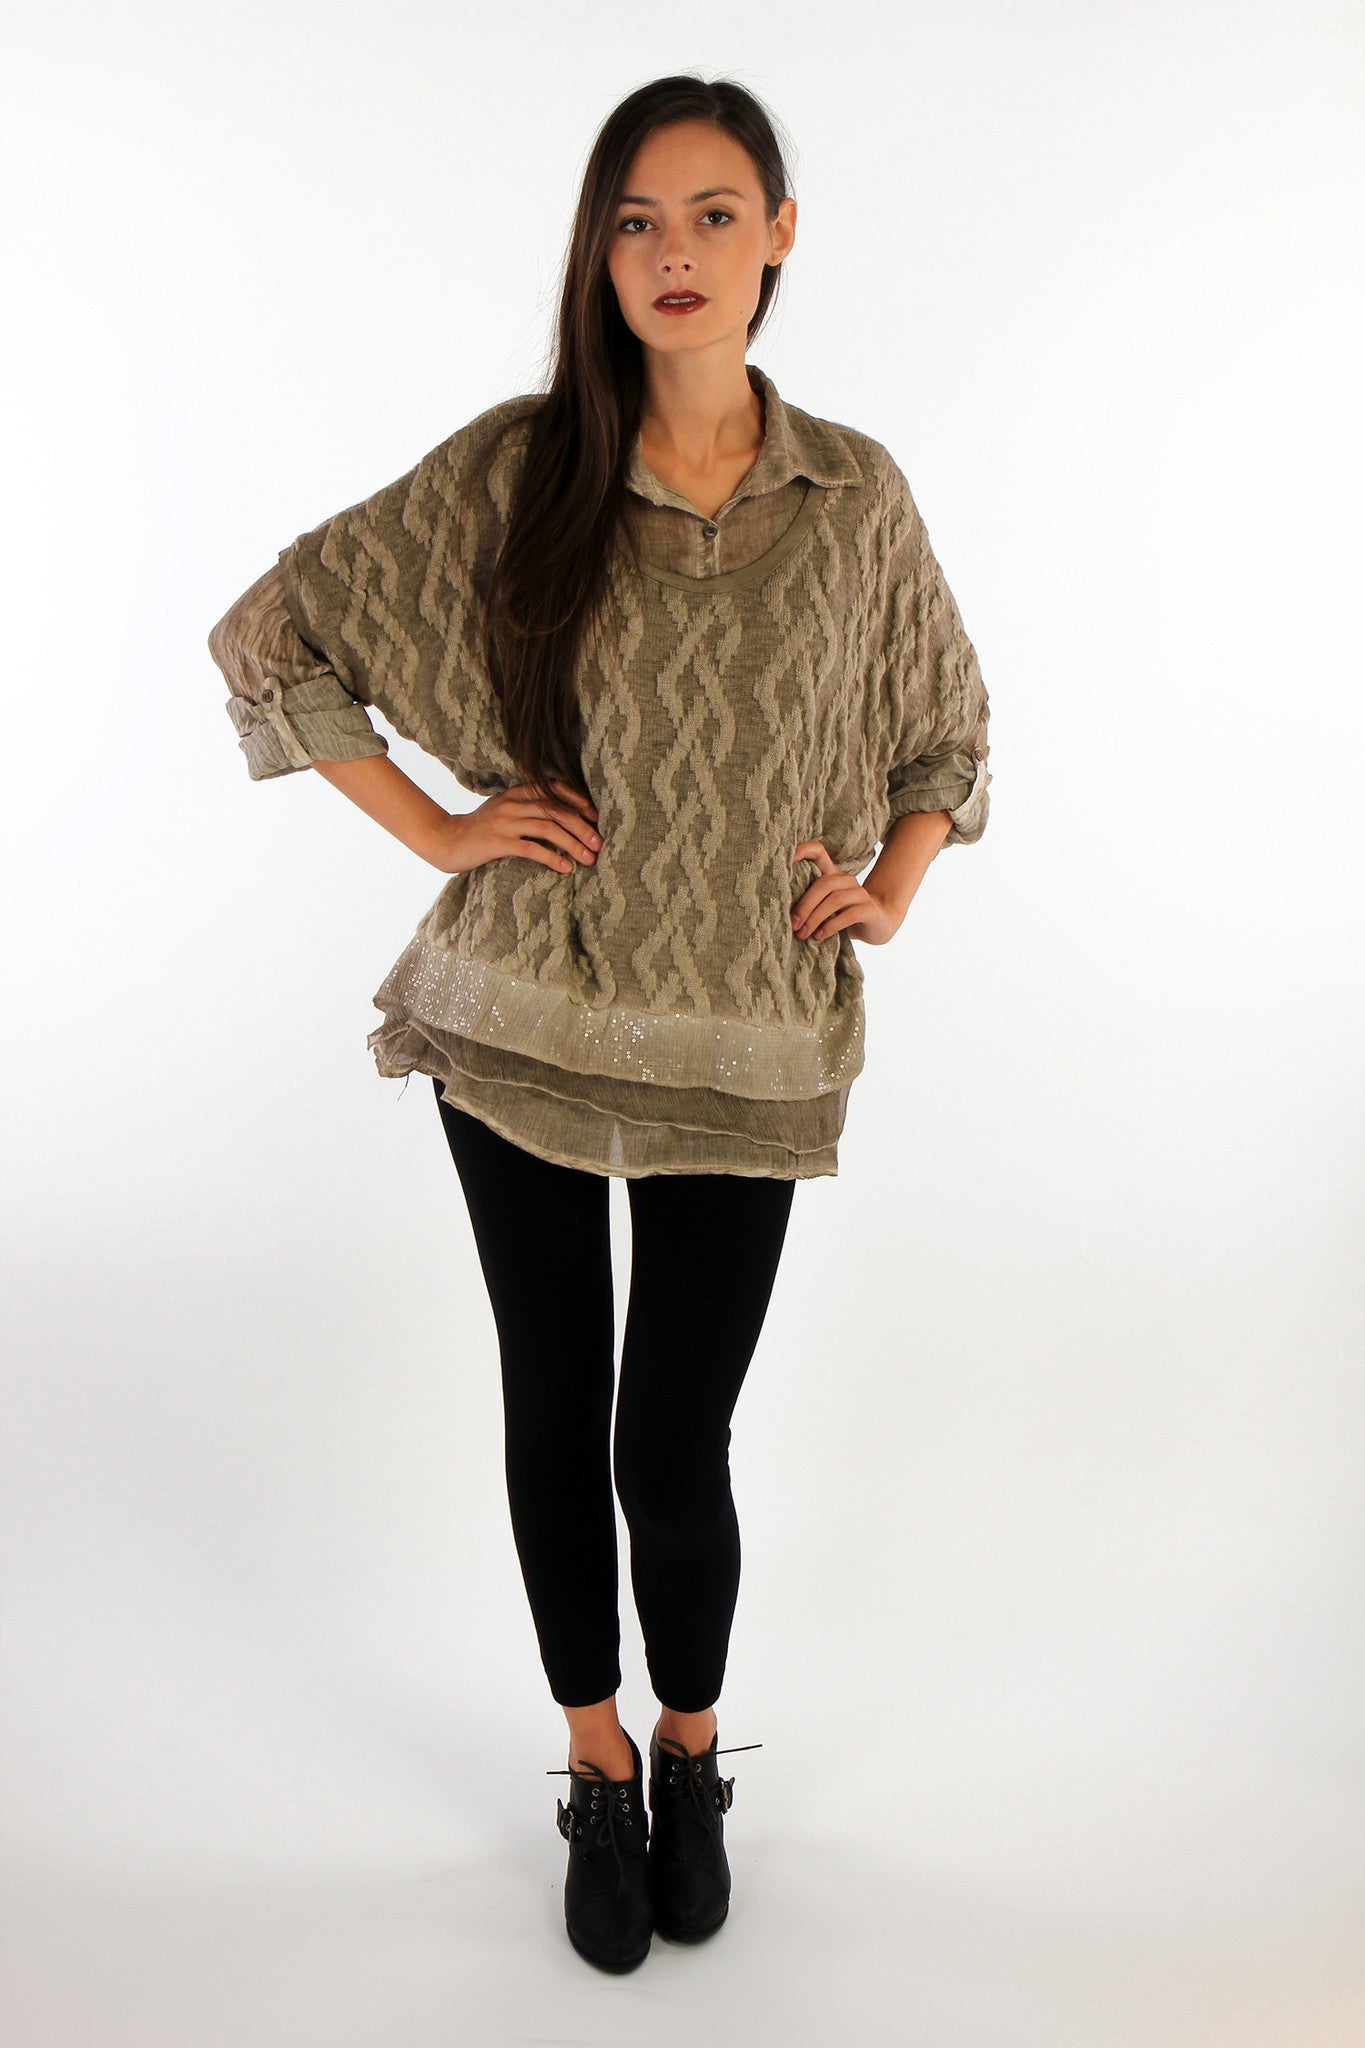 2 Pieces: Jumper and Tunic